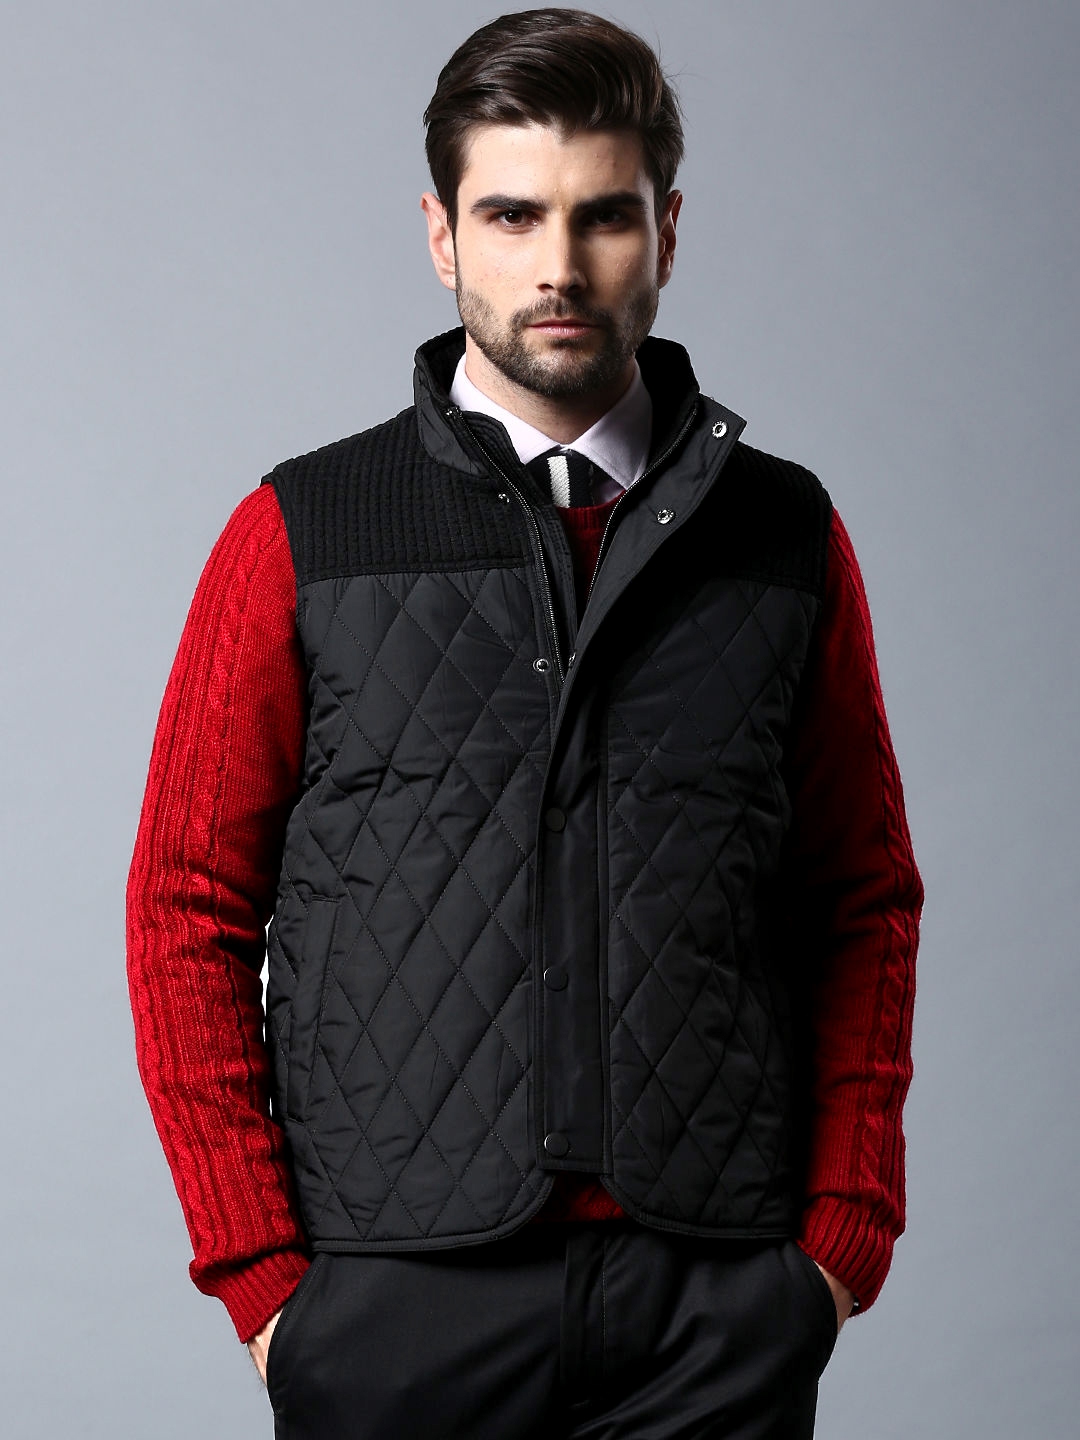 Buy INVICTUS Black Sleeveless Quilted Jacket - Jackets for Men 902850 ...